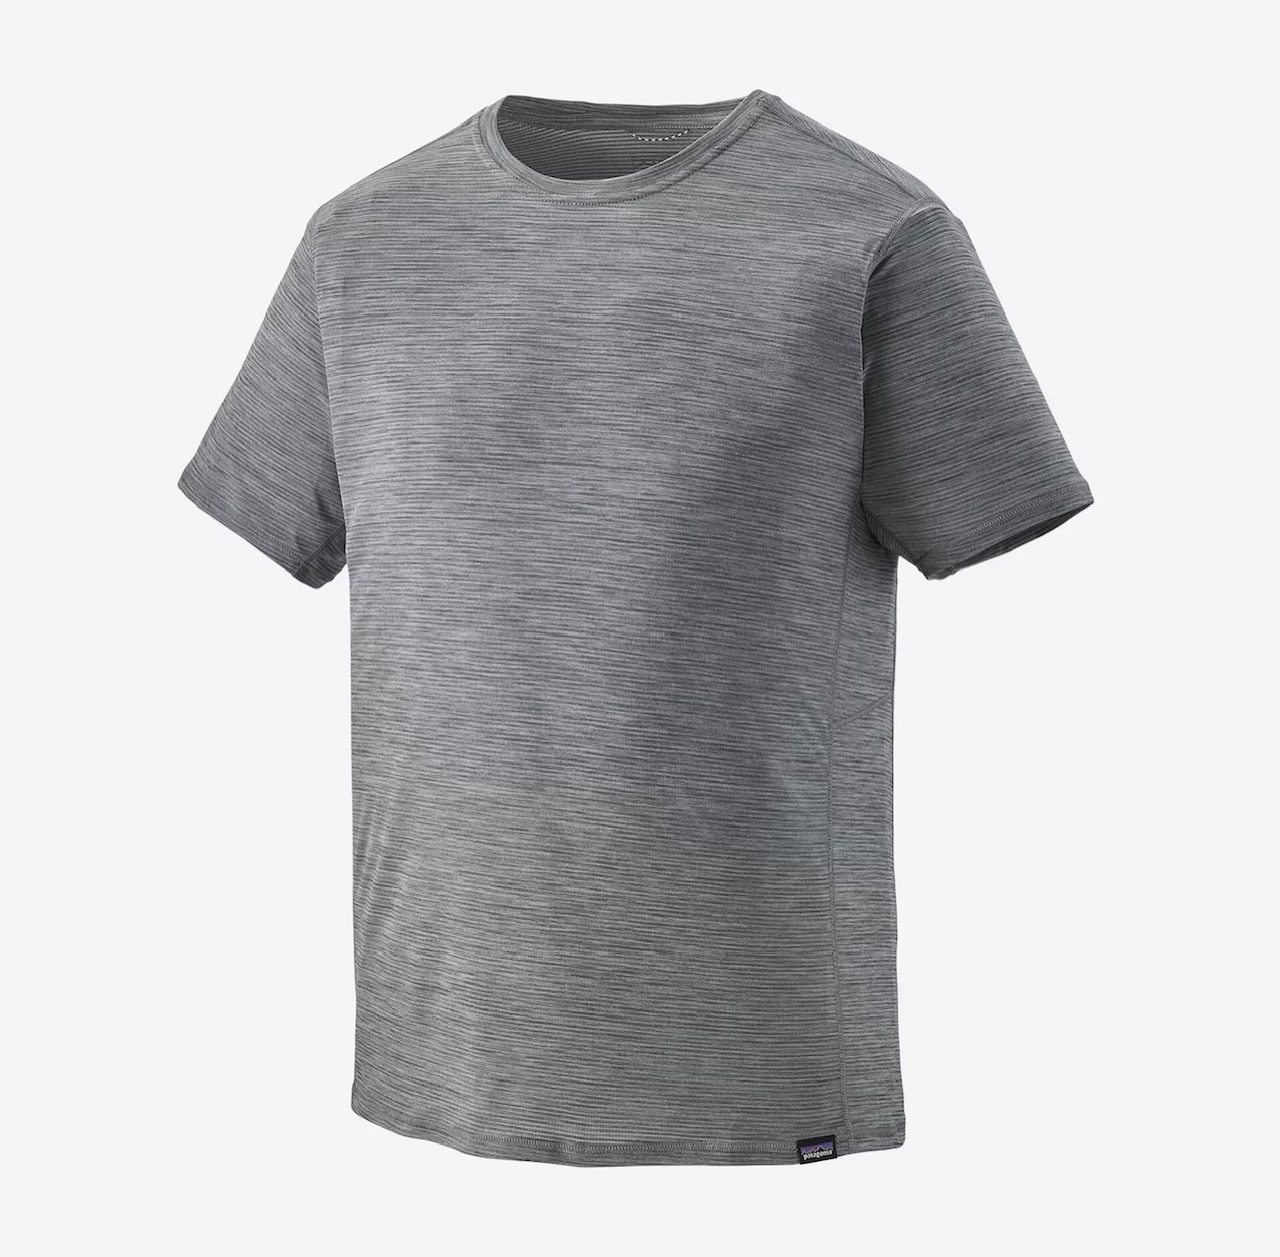 Patagonia M's Capilene Cool Lightweight Shirt - Forge Grey: Feather Grey X-Dye - Large